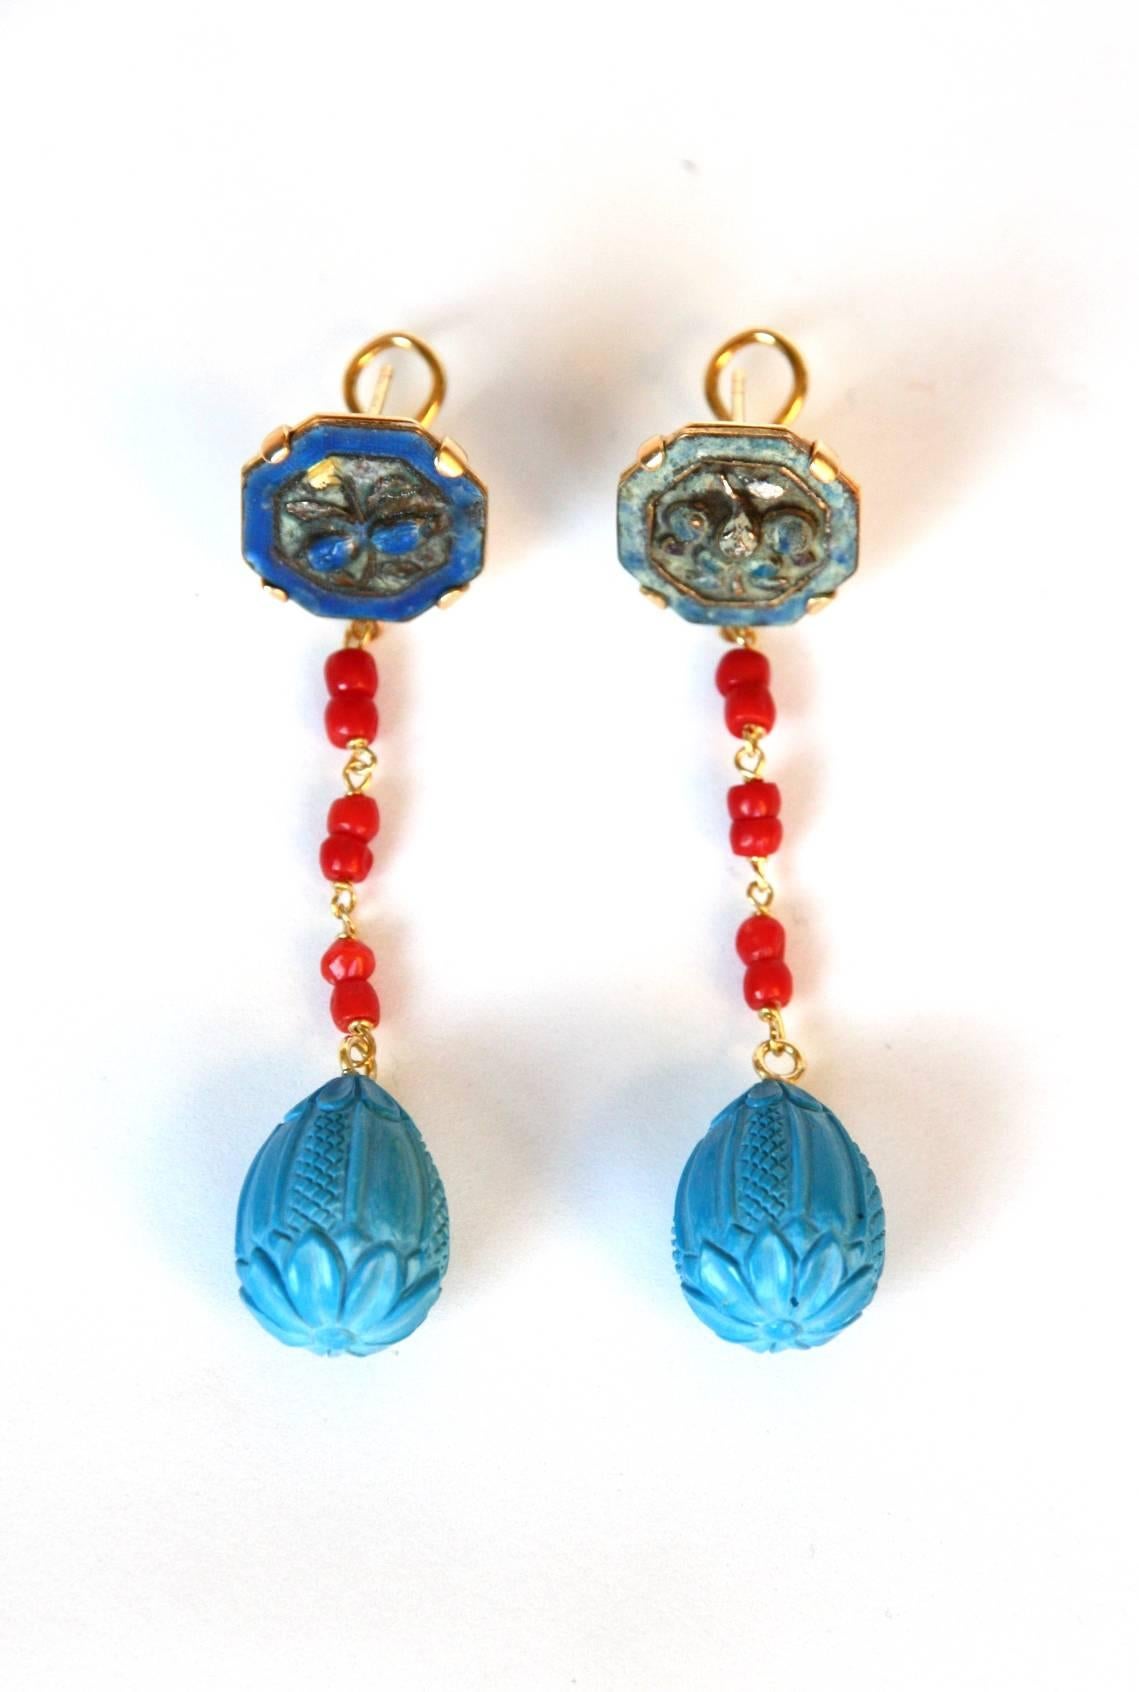 Earrings with antiques Chinese enamel button, red Italian coral, Indian carved turquoise drop, Gold 18k  gr. 9,20,  length 7cm, weight 11,8gr each.
All Giulia Colussi jewelry is new and has never been previously owned or worn. Each item will arrive